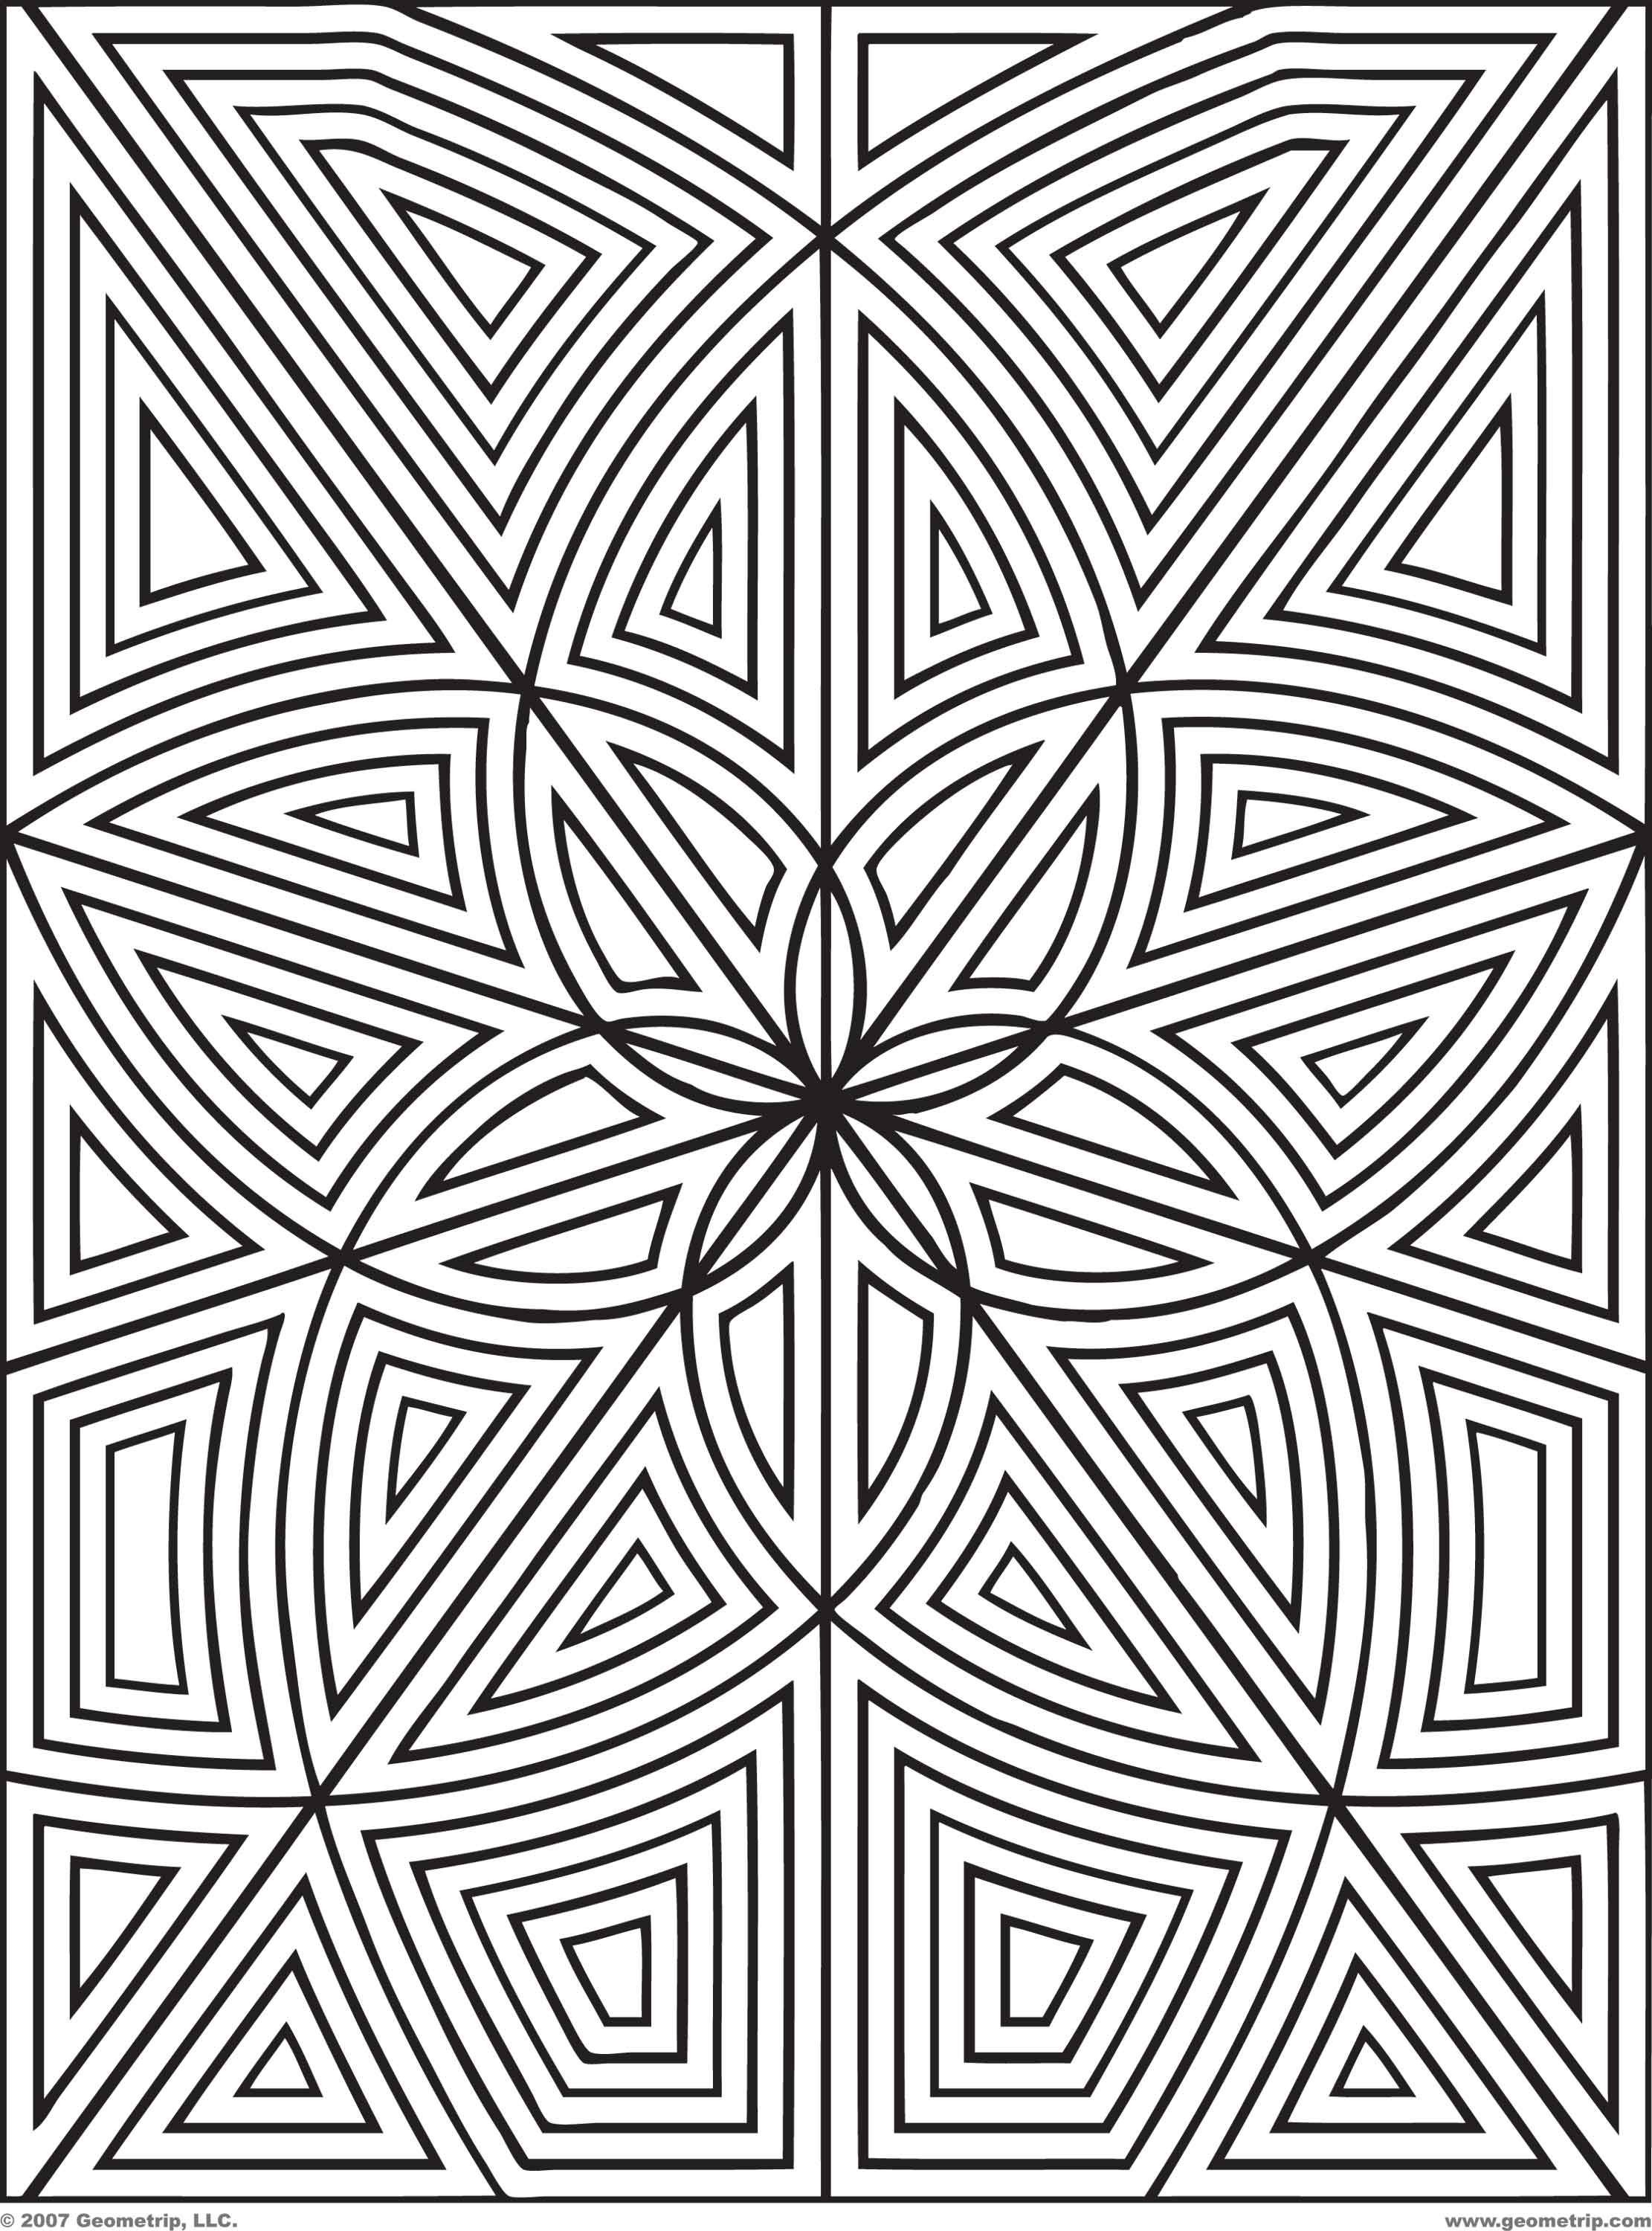 Geometric Coloring Page Inspirational Design Coloring Page Designs Inspirationa Brilliantric